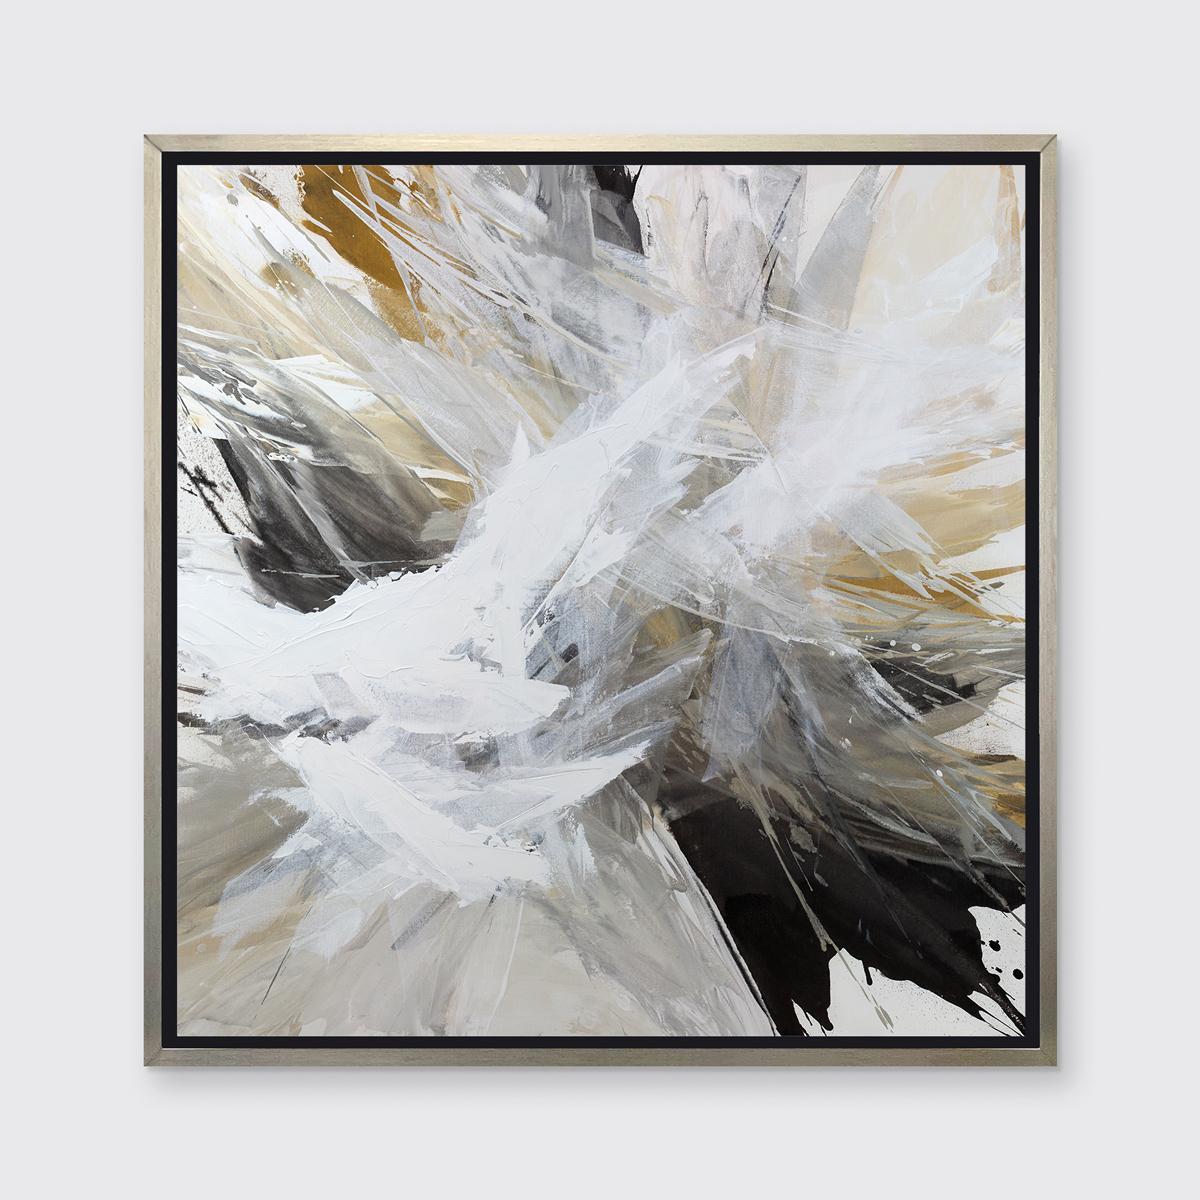 Teodora Guererra Abstract Print - "Today I Choose Palette Knives, " Framed Limited Edition Giclee Print, 36" x 36"